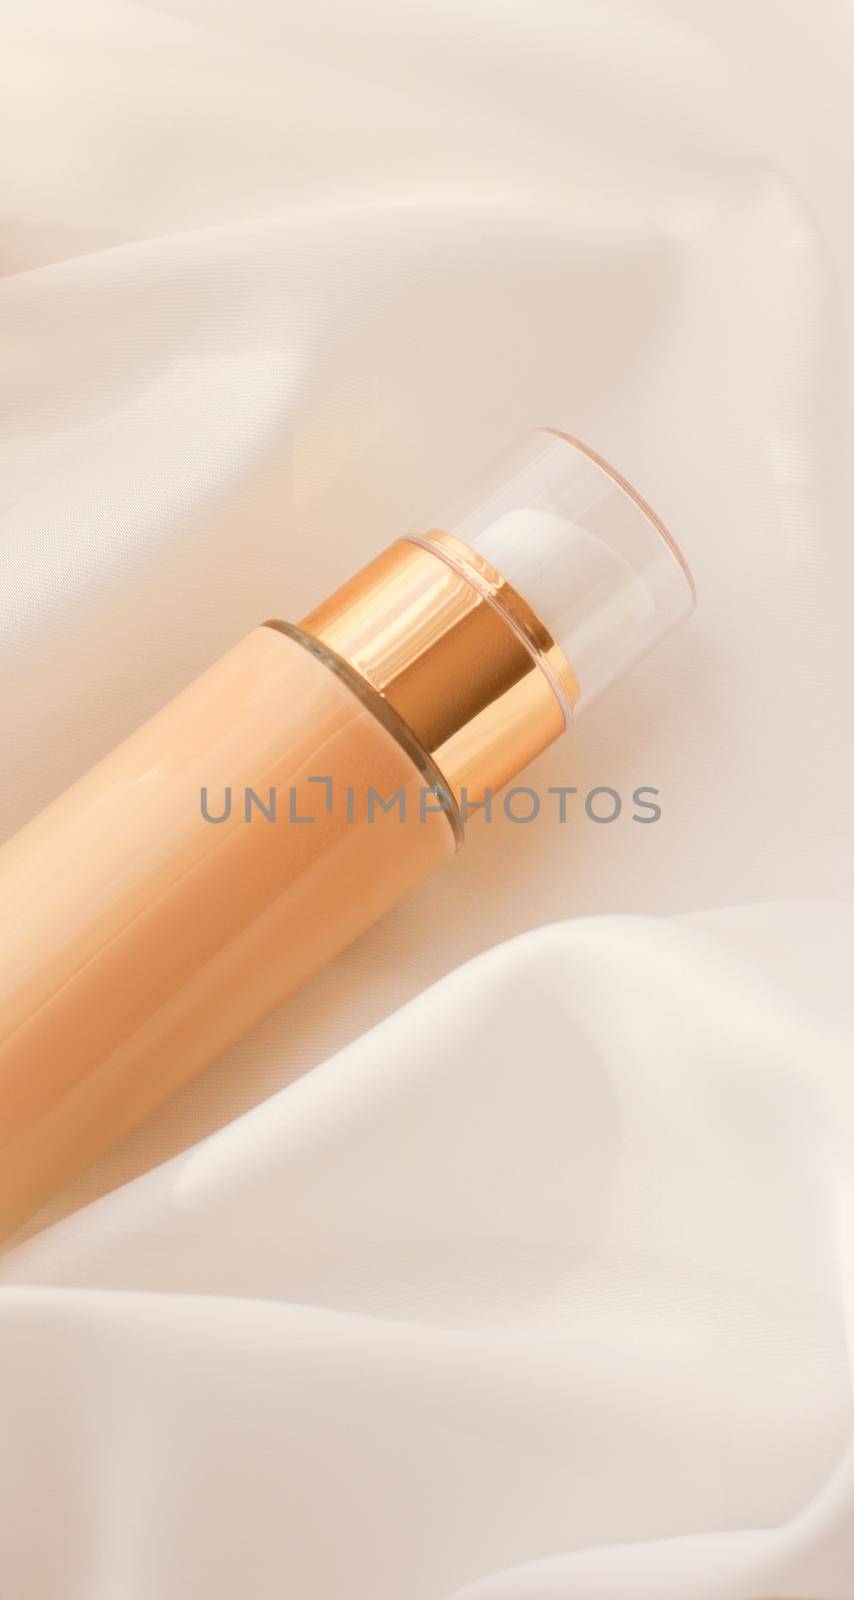 Tonal bb cream bottle make-up fluid foundation base for nude skin color on silk background, cosmetics product as luxury beauty brand holiday design by Anneleven